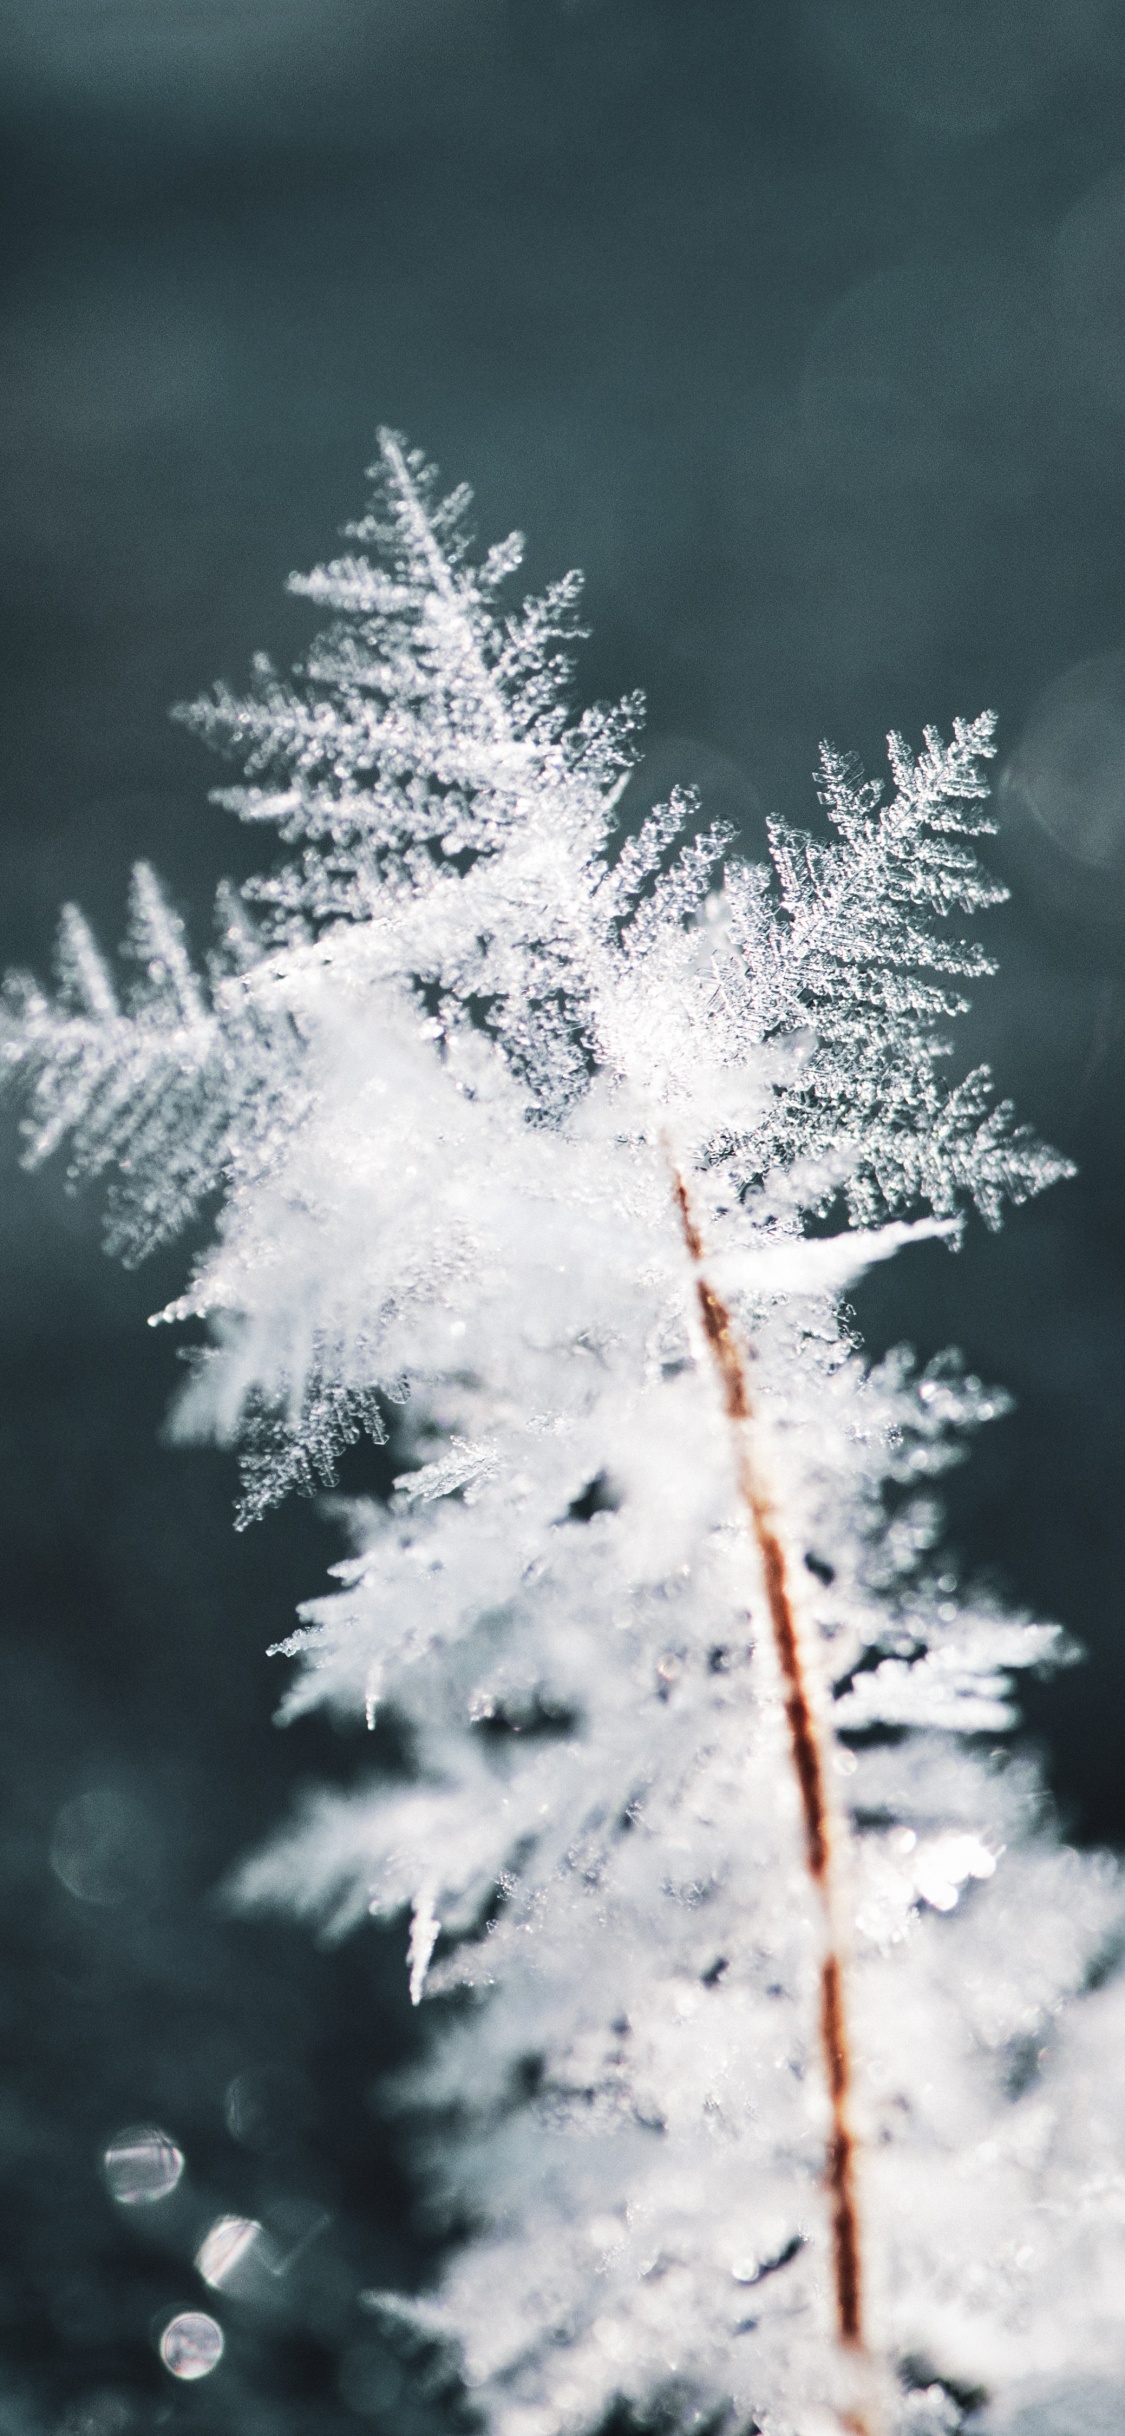 Winter, Snow, Frost, Freezing, Branch. Wallpaper in 1125x2436 Resolution